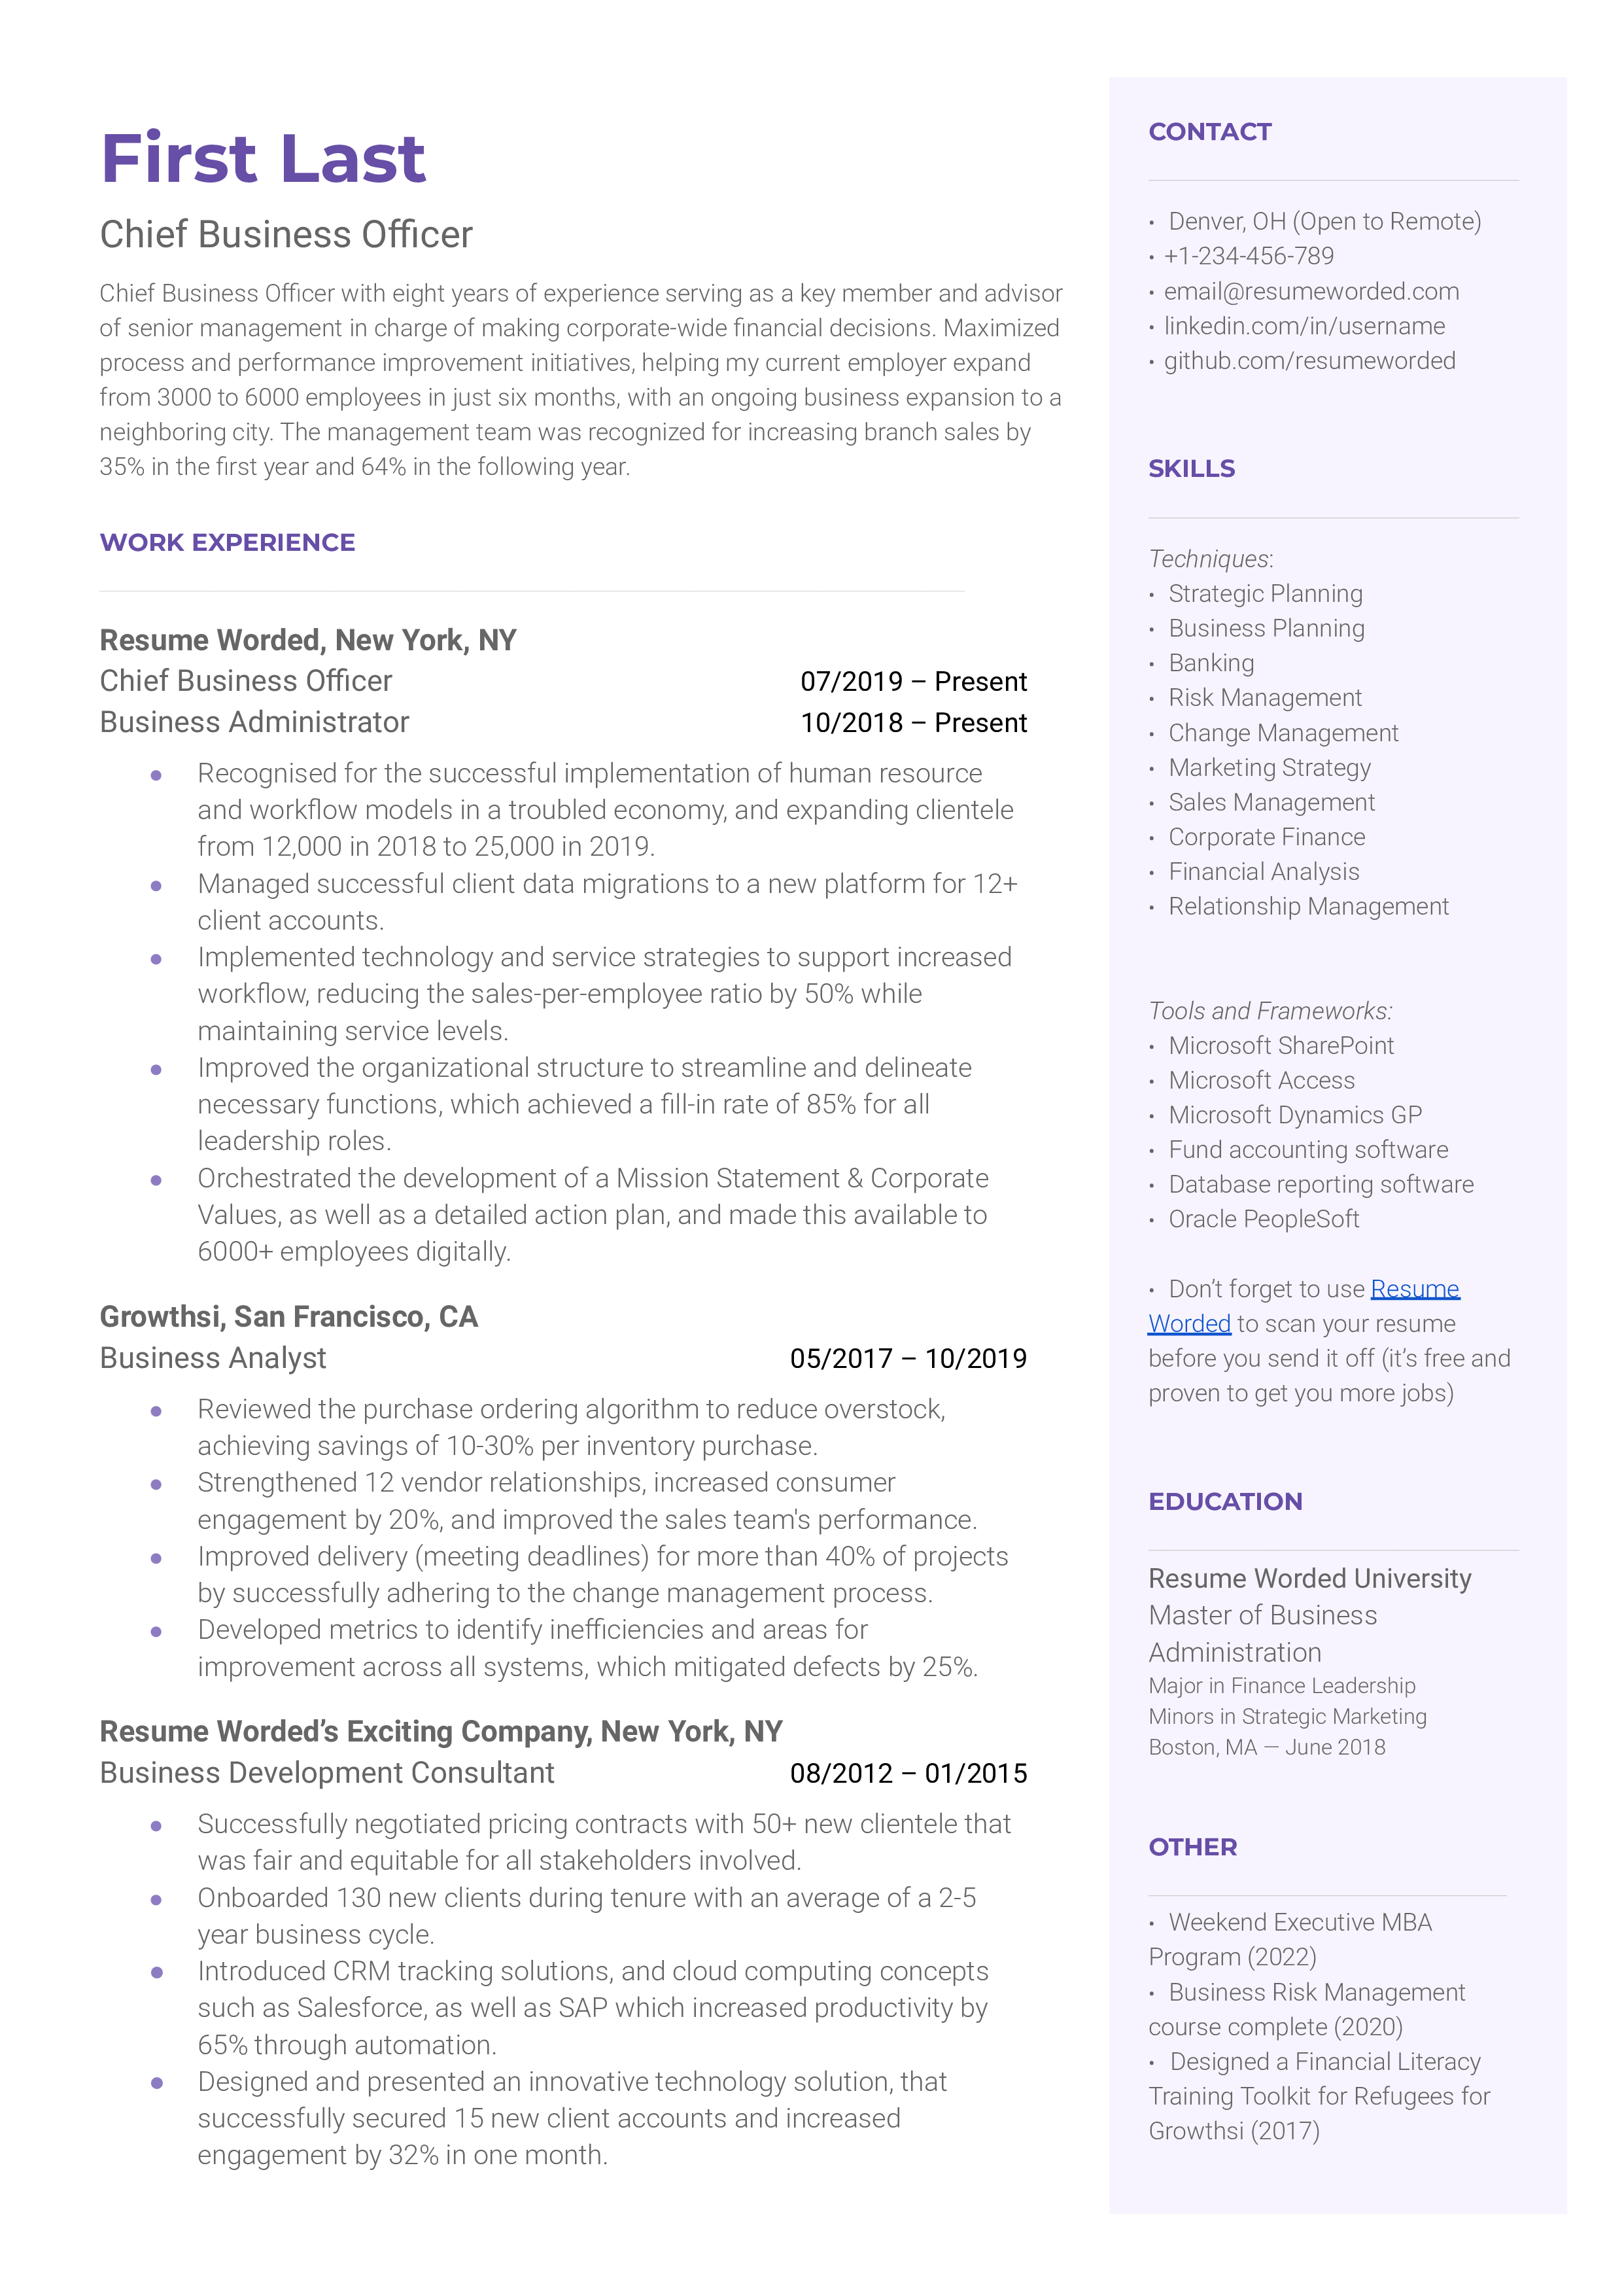 A chief business officer resume sample that highlights the applicant's extensive skill set and career accomplishments.